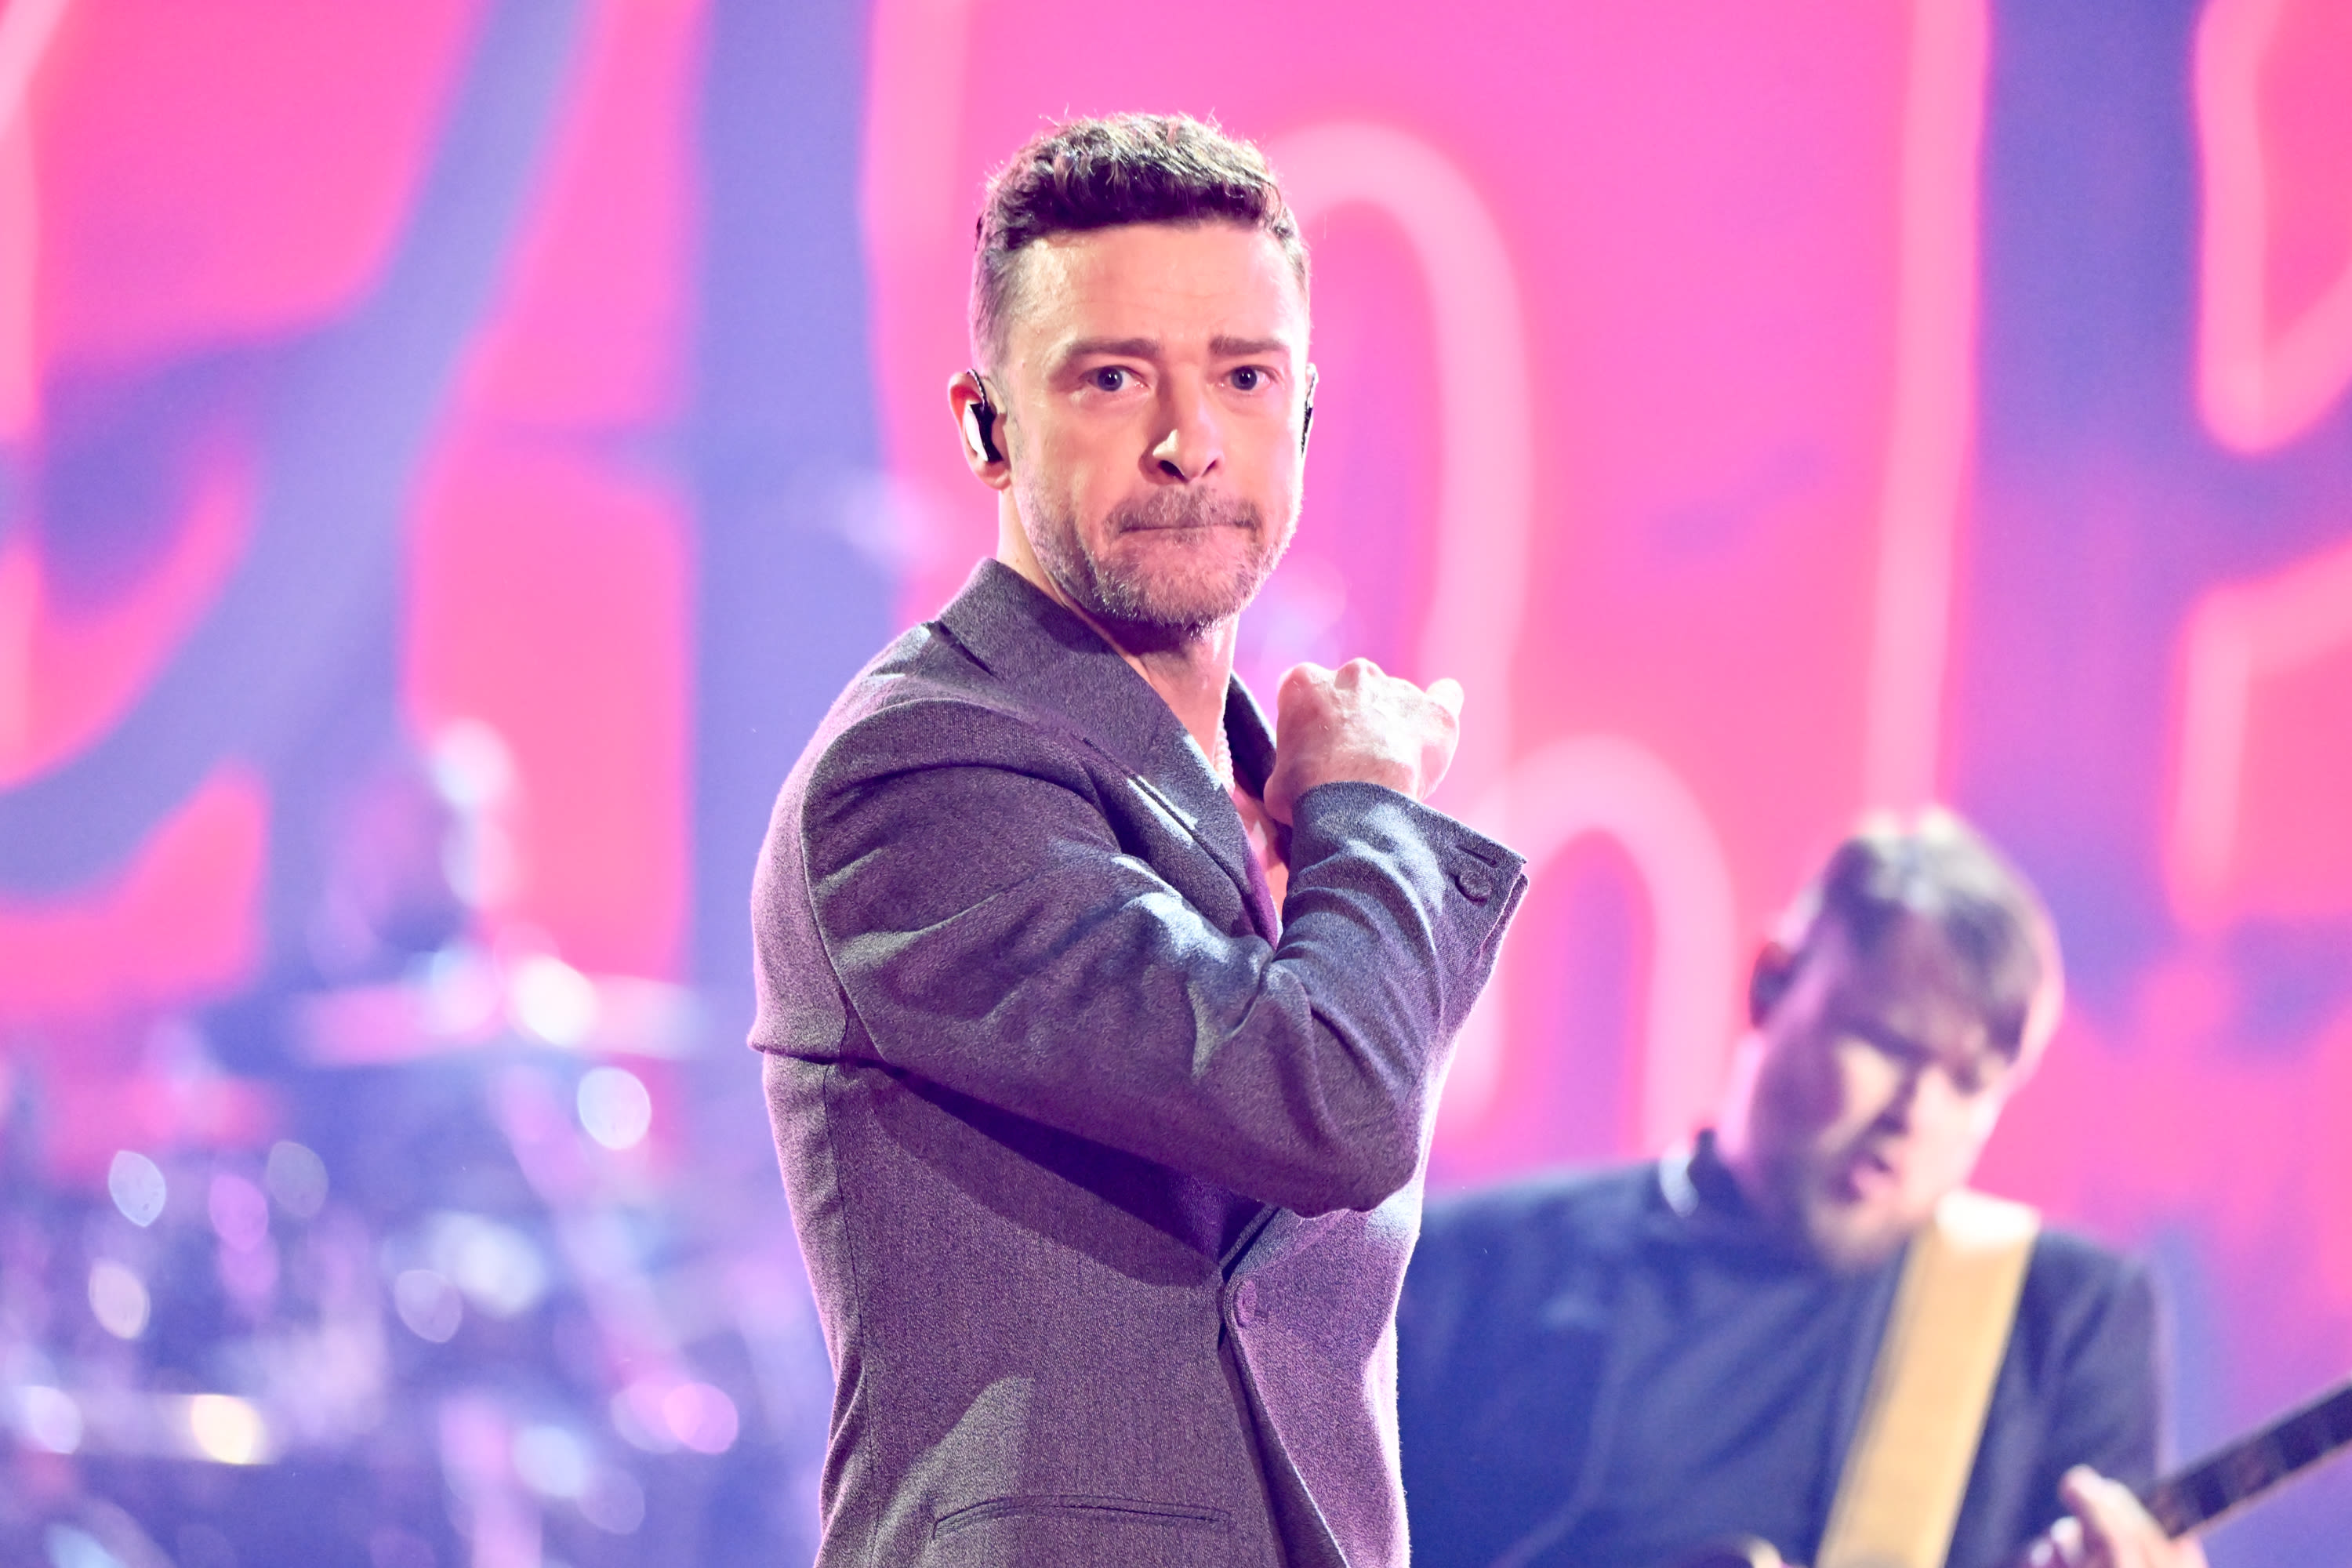 Justin Timberlake Month Is Here — & His Sons Are His Biggest Little Fans in a Rare New Photo